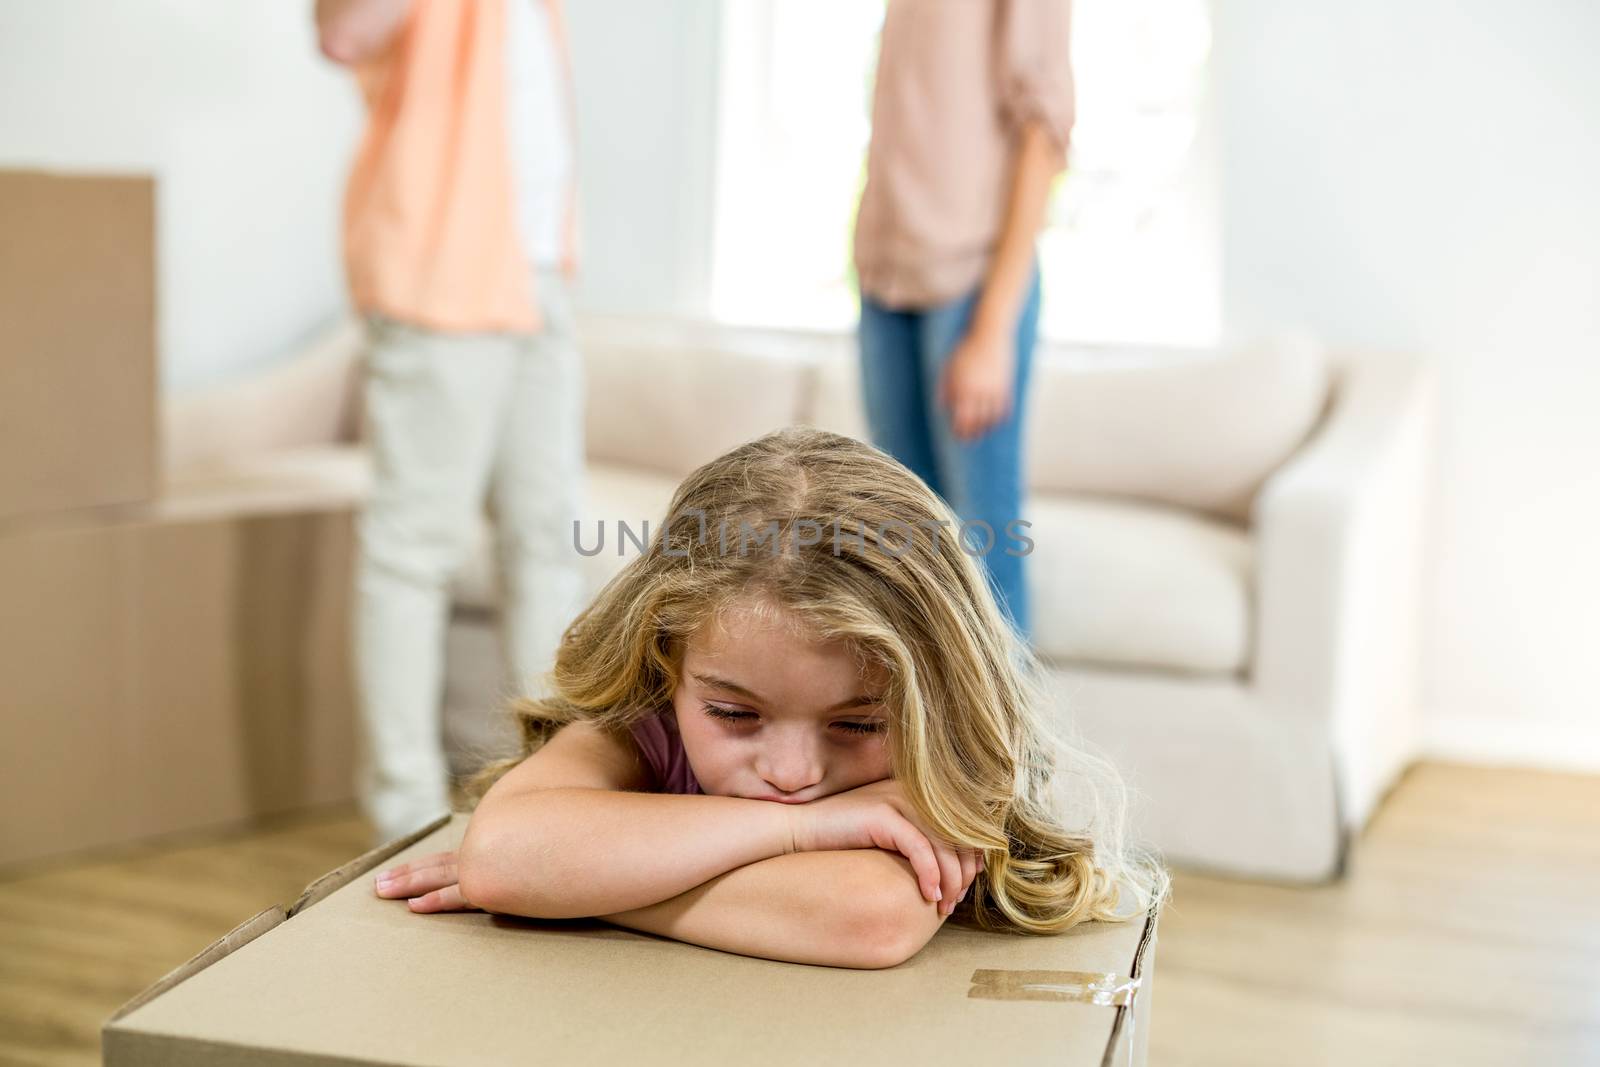 upset girl leaning on box while parents in background by Wavebreakmedia